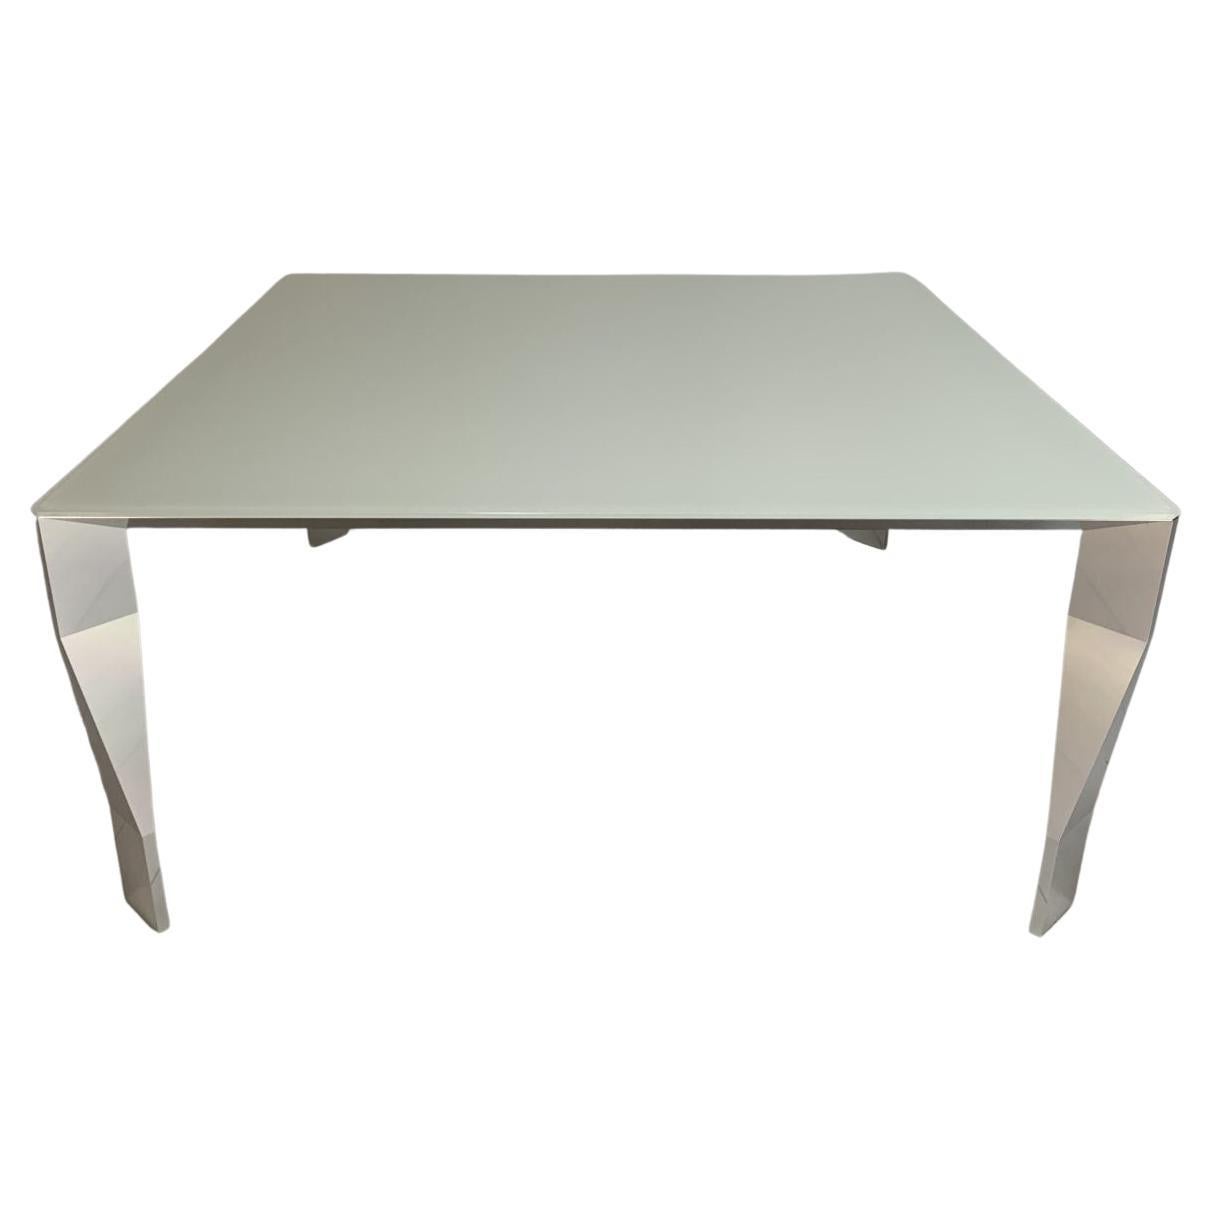 Molteni & C “Diamond” Table, Square Occasional/Dining Table, in Glass For Sale